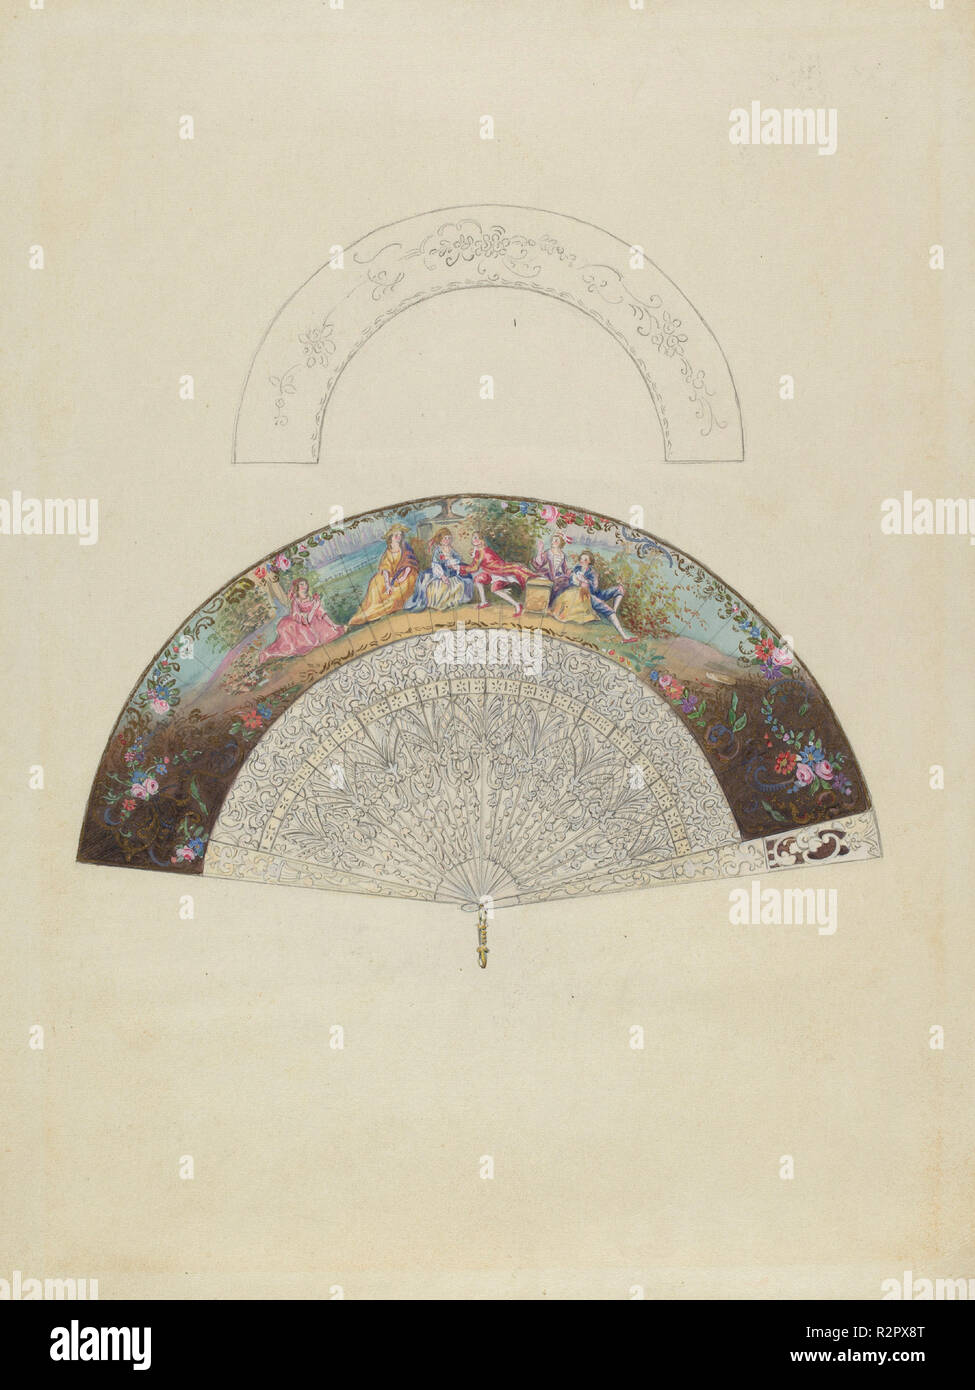 Fan. Dated: c. 1936. Dimensions: overall: 29.9 x 22.9 cm (11 3/4 x 9 in.). Medium: watercolor, graphite, and gouache on paperboard. Museum: National Gallery of Art, Washington DC. Author: Jessie M. Benge. Stock Photo